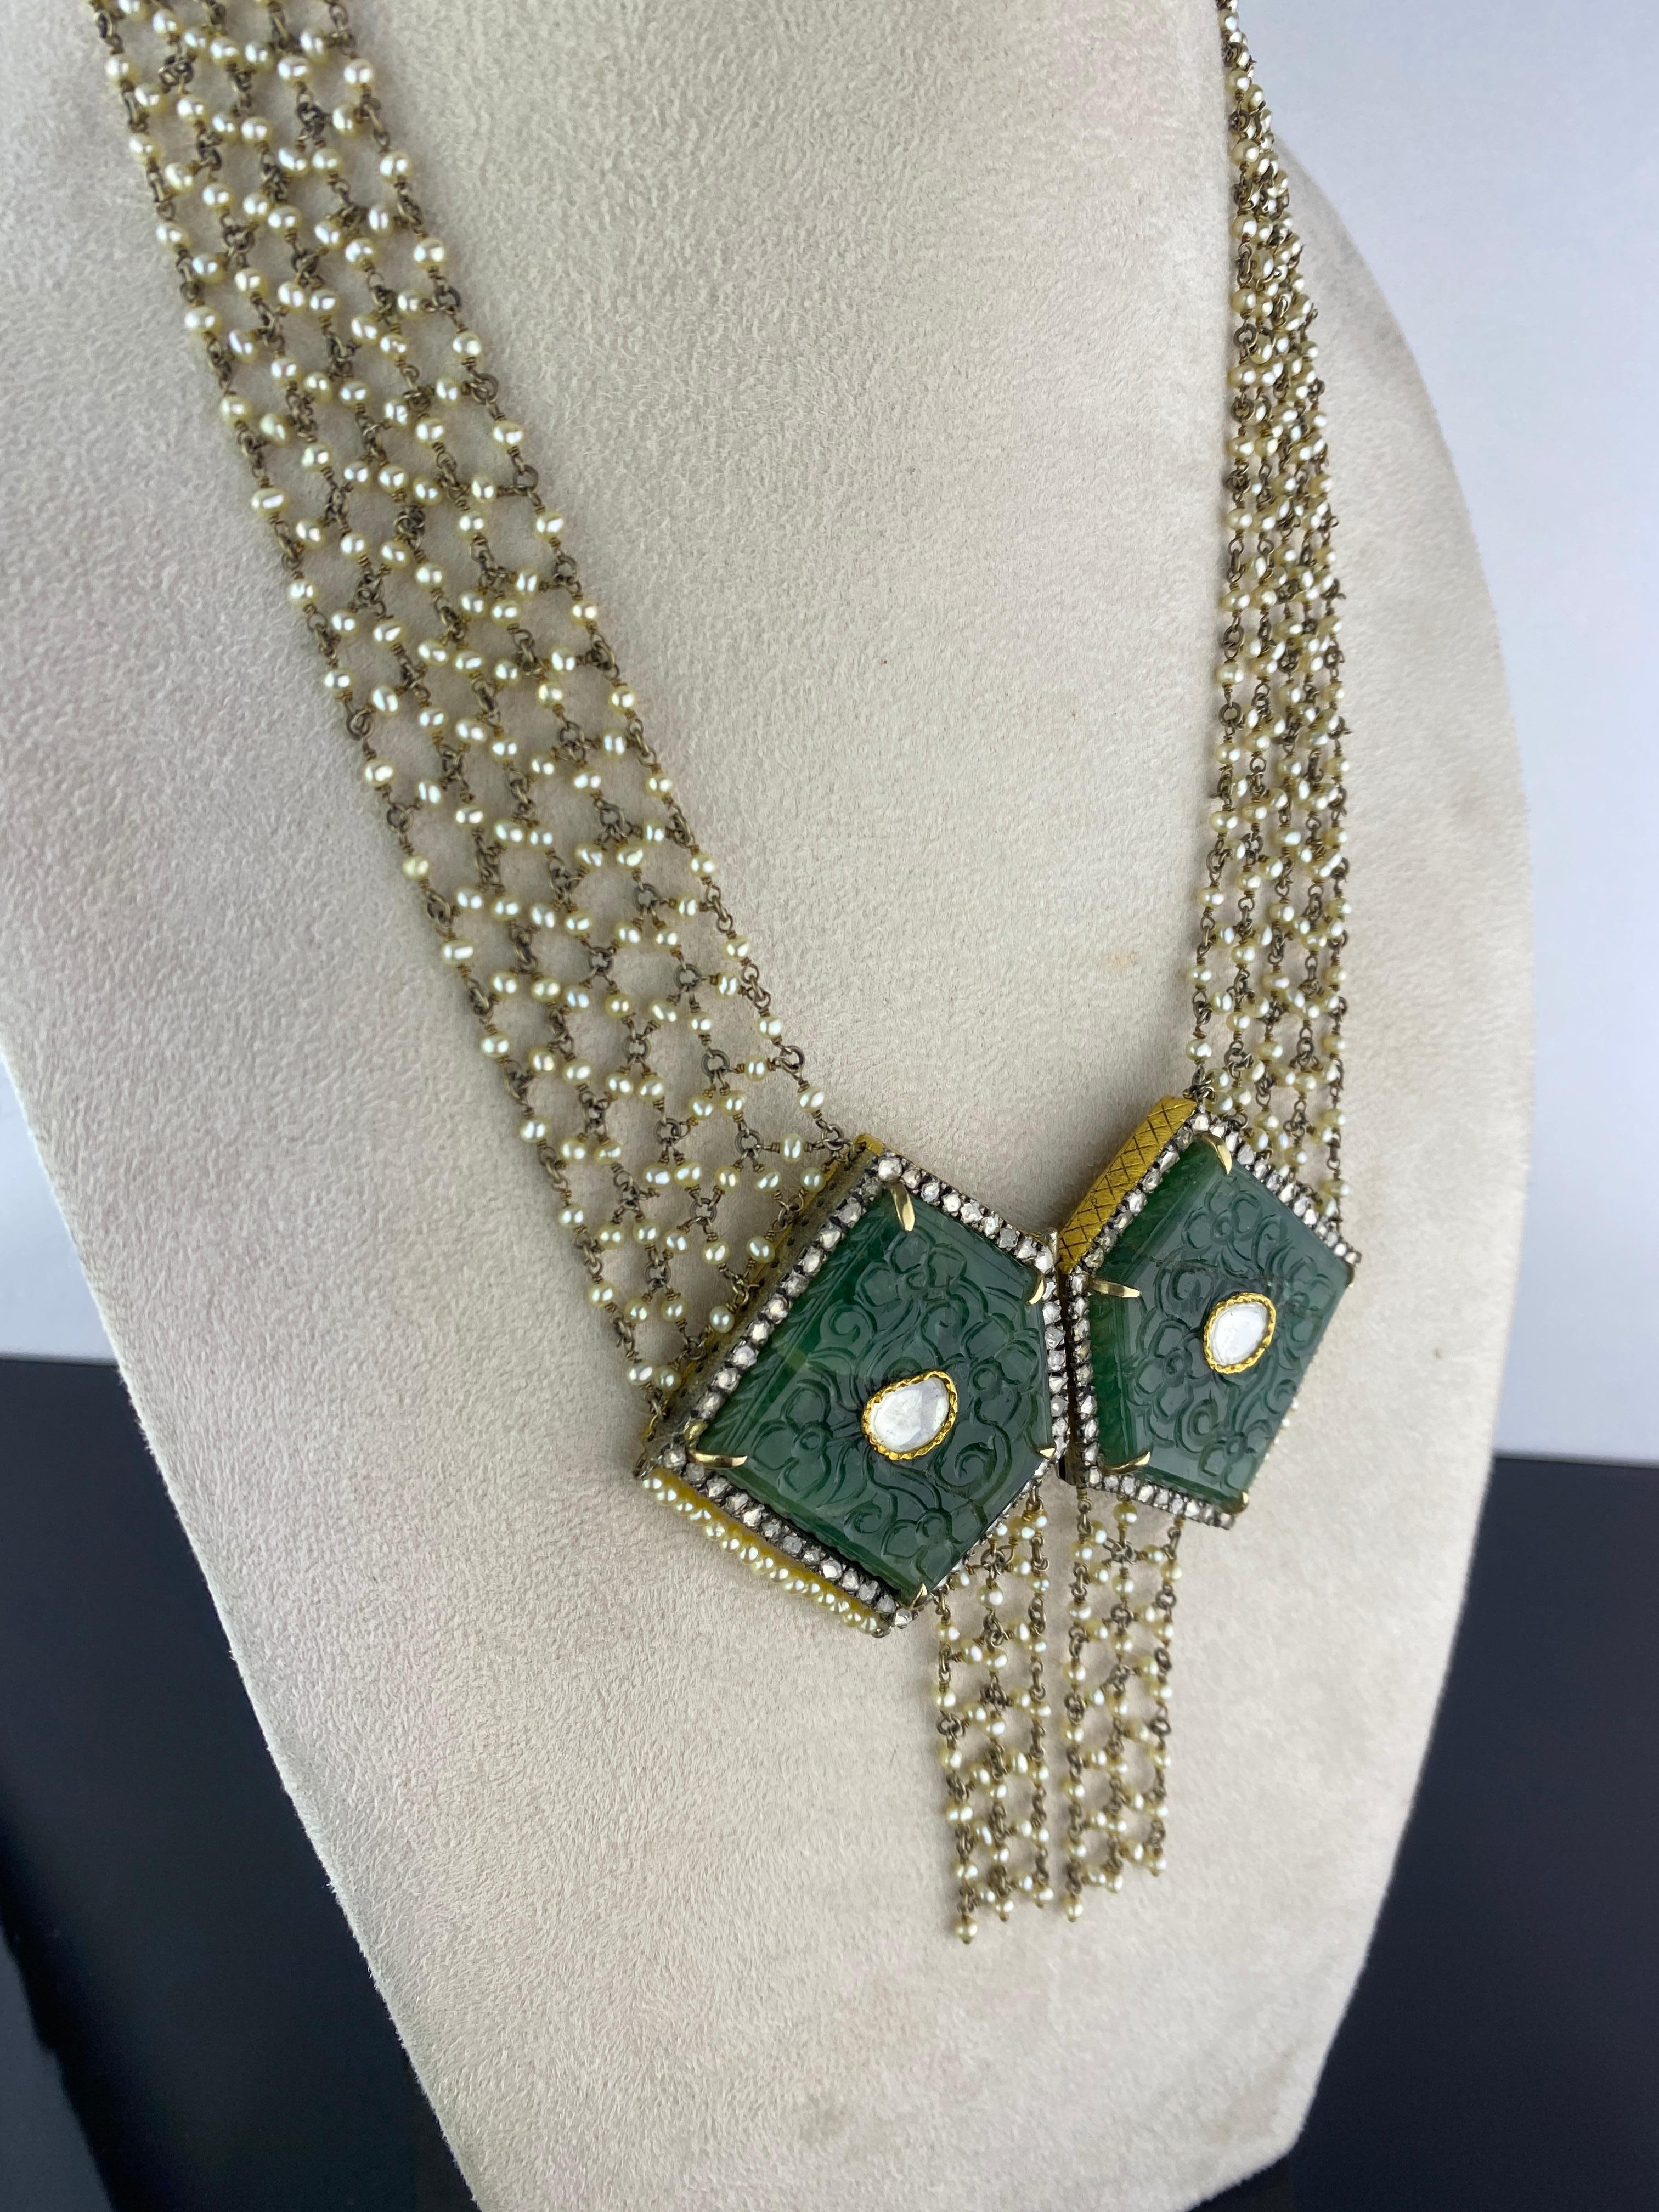 A very unique, antique looking, 110 carat Emerald (2 pieces) and rose-cut Diamond collar necklace, adorned with pearls. The necklace fastening is fro the front, making it easy to wear. The stones are set in silver, and plated in gold. 
Please feel